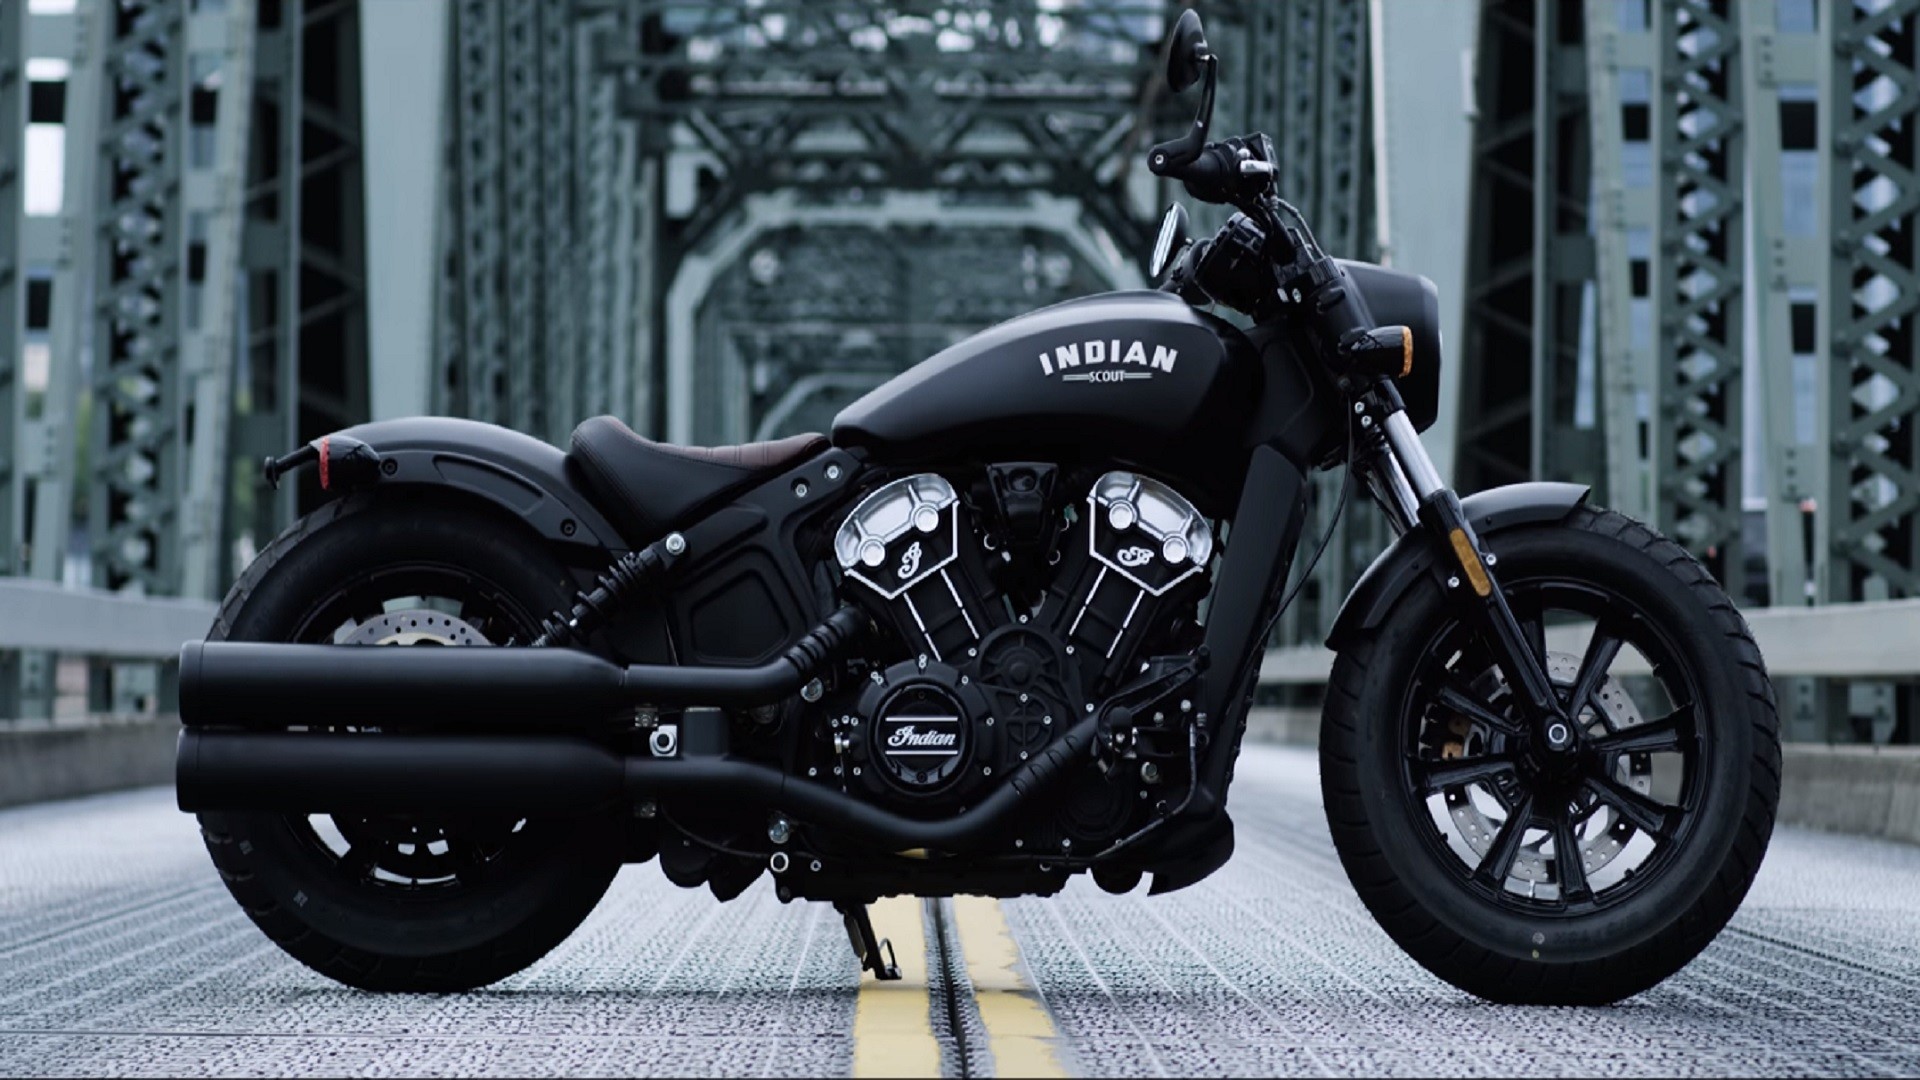 1920x1080 Indian Scout Bobber Motorcycle Is Slammed Style In A Sleek Design